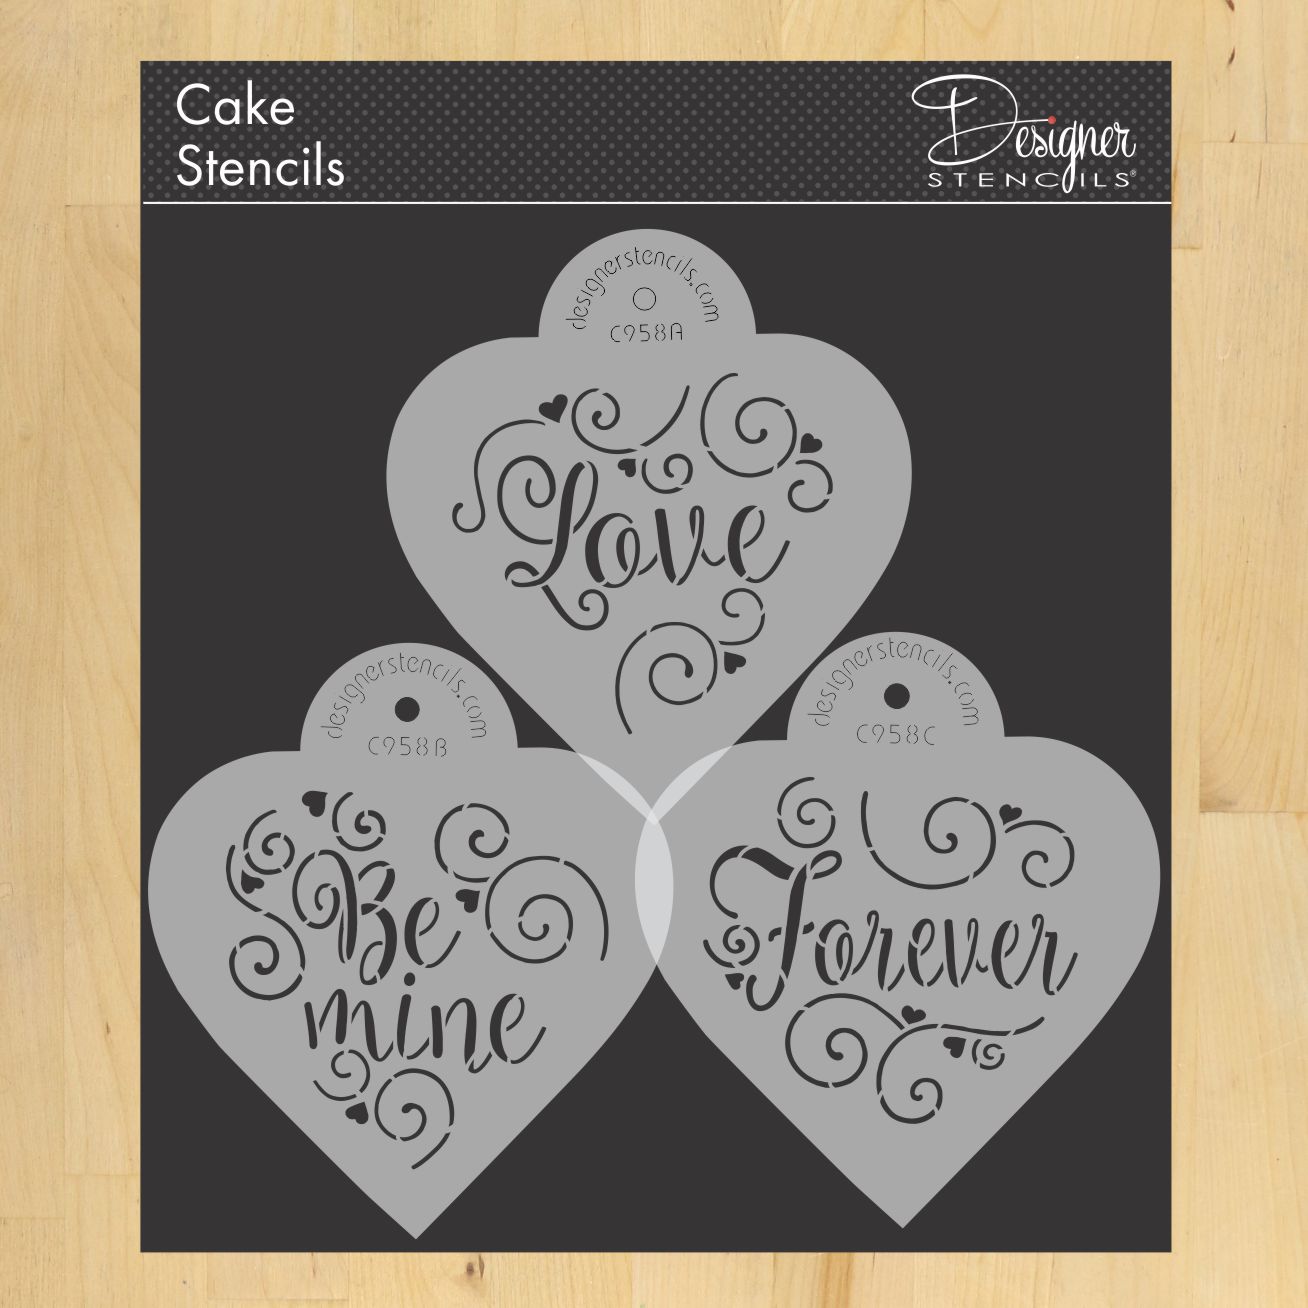 Love Be Mine Forever Heart Shaped Cookie Stencil Set by Designer Stencils